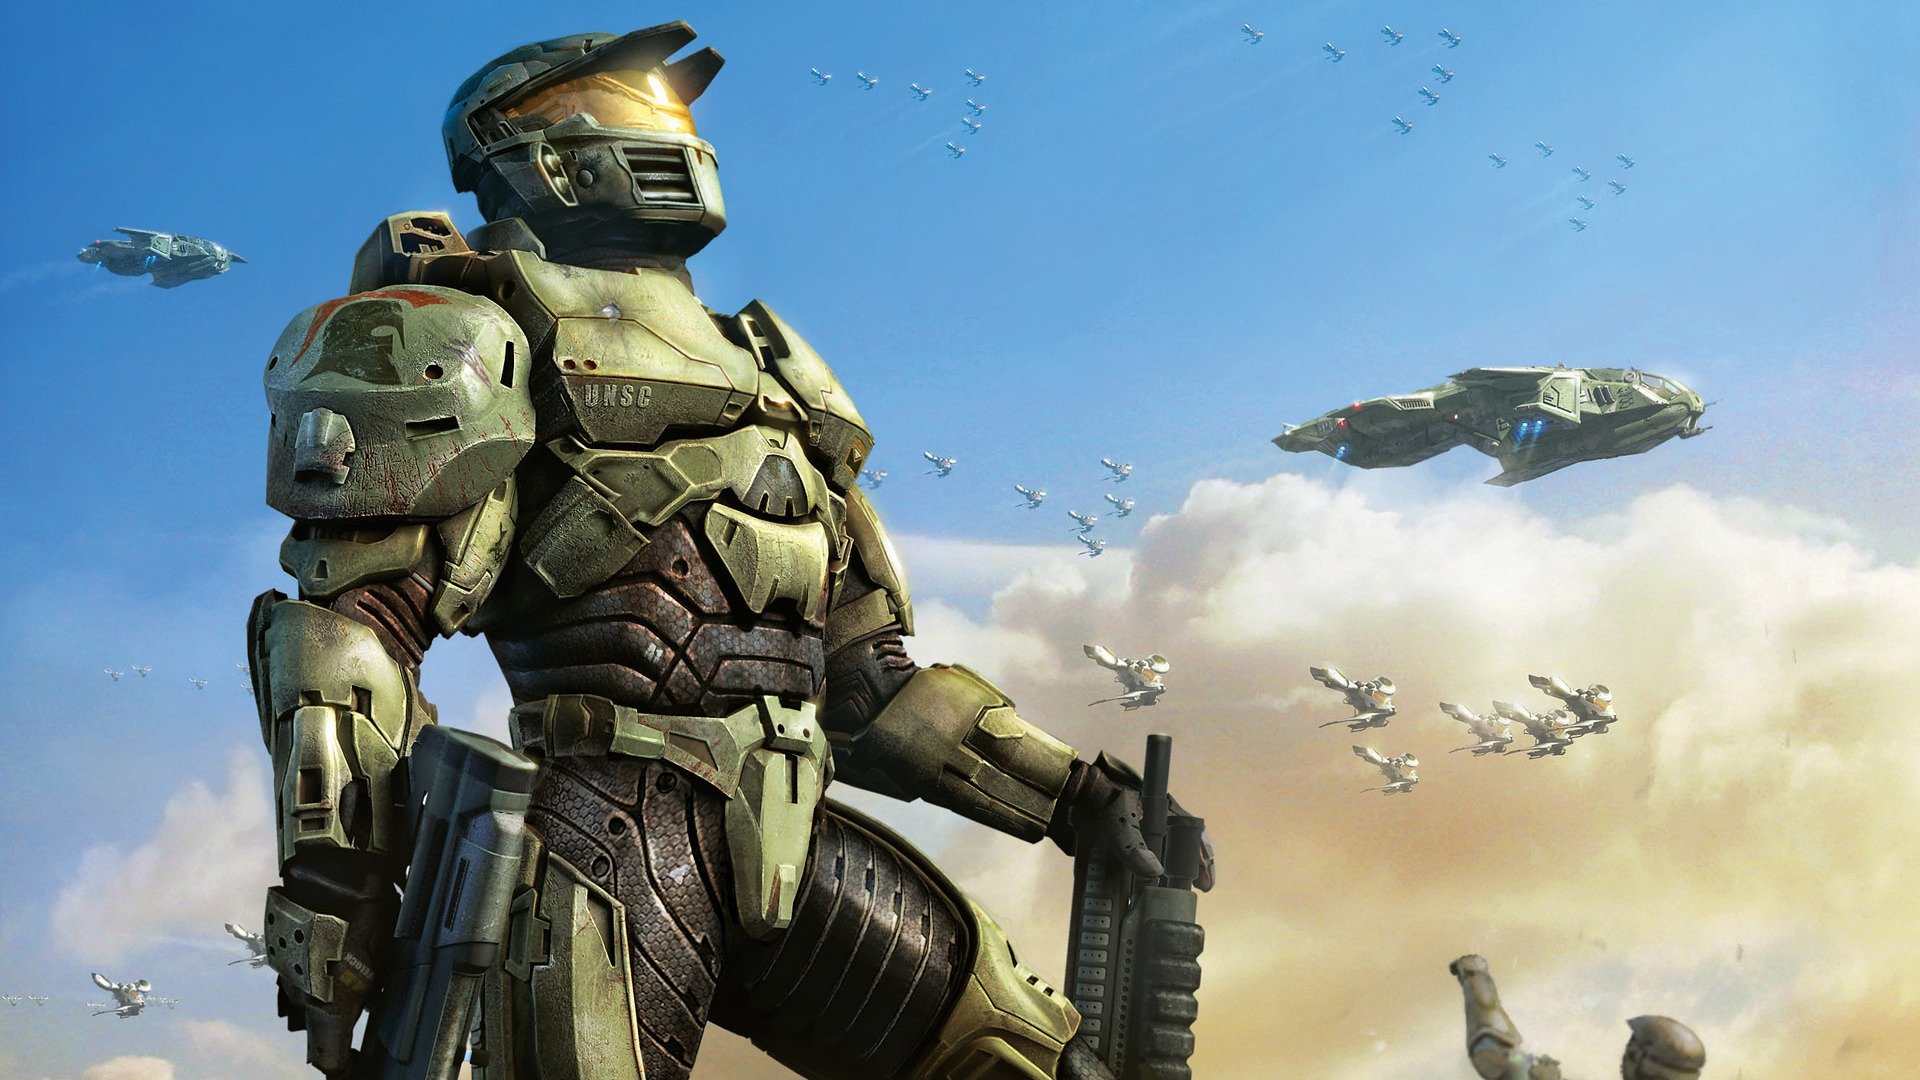 halo, Shooter, Fps, Action, Fighting, Warrior, Sci fi, Futuristic, Armor, Cyborg, Robot Wallpaper